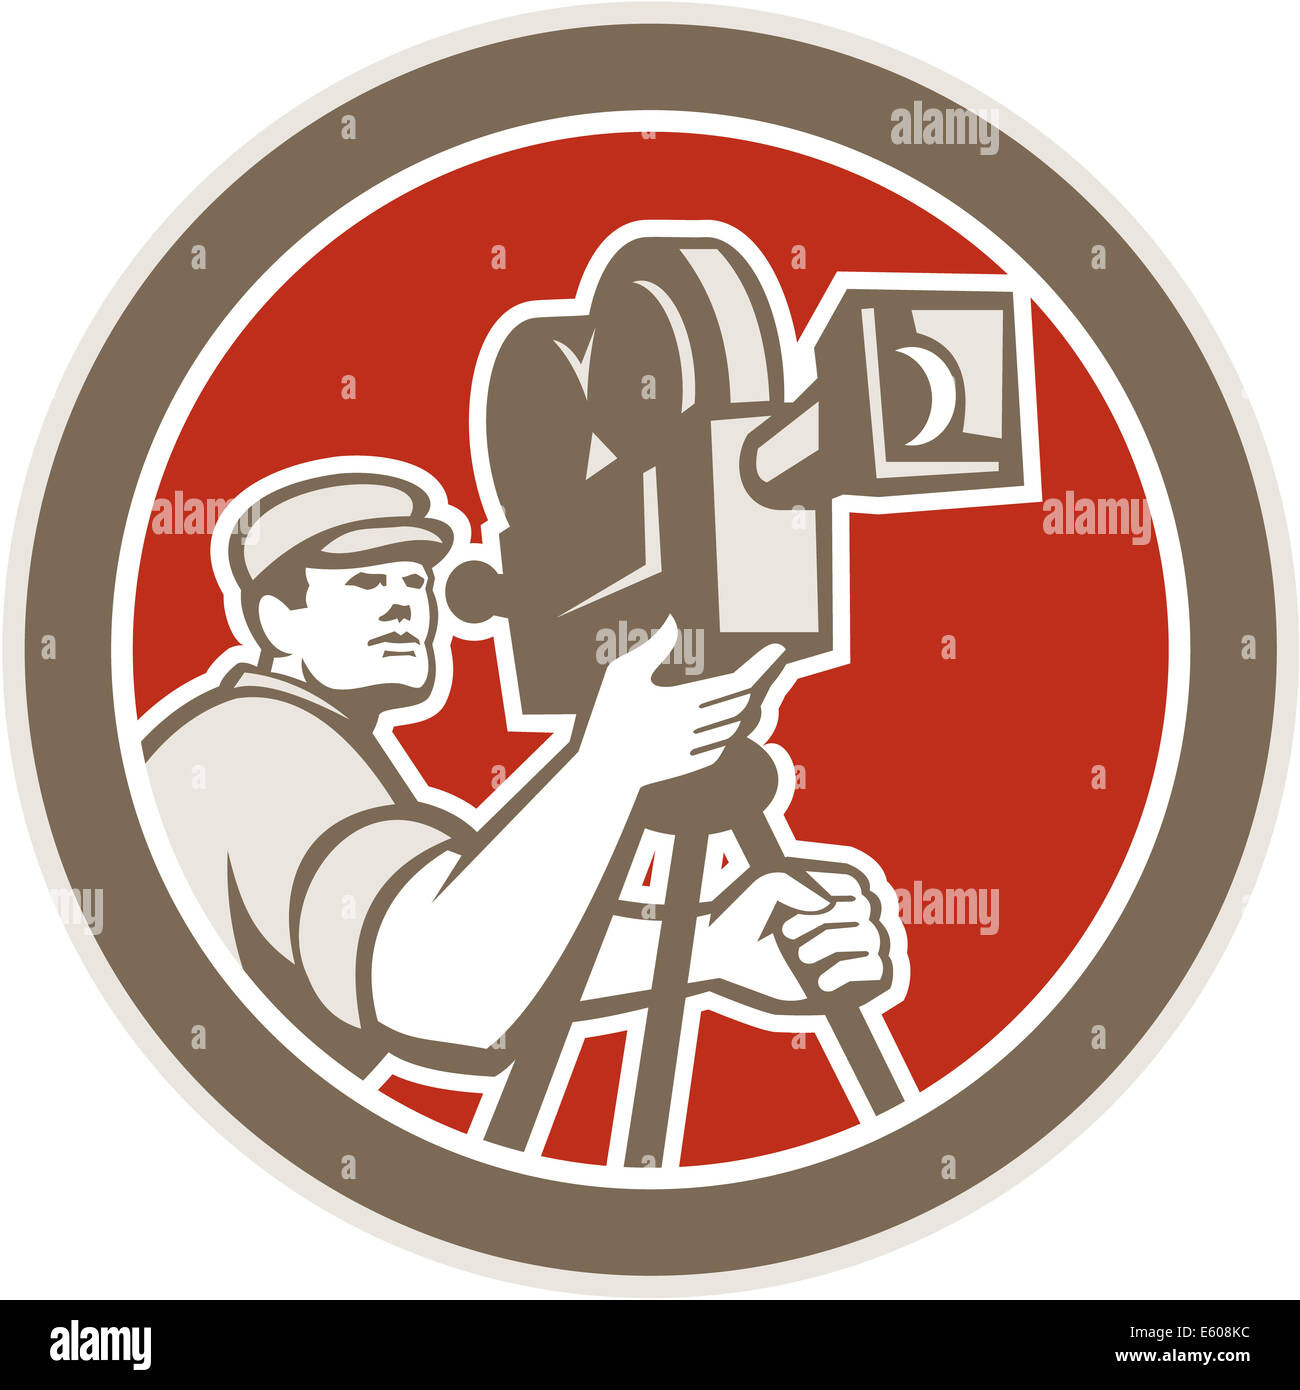 Illustration of a cameraman movie director with vintage movie film camera set inside circle on isolated background done in retro style. Stock Photo